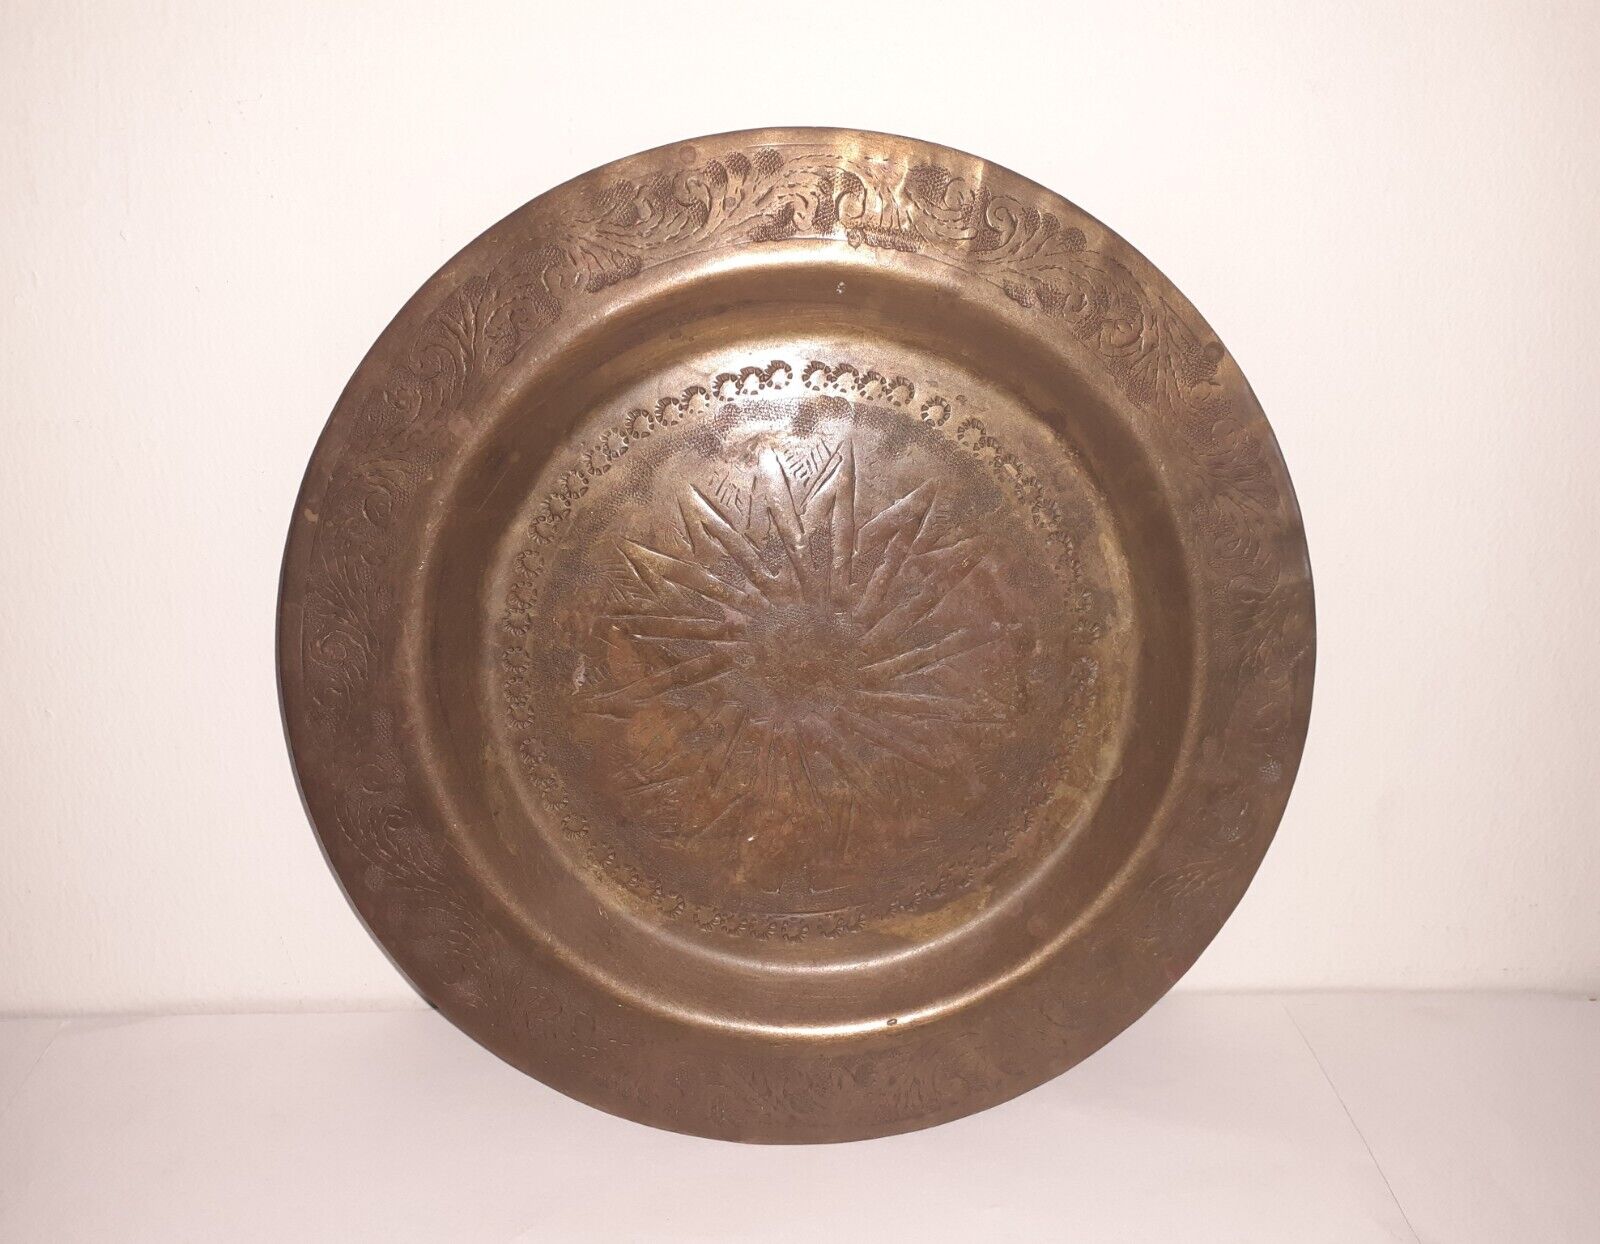 Vintage Morocco Round Brass Metal Plate/Dish 1978 Hanging Decor 7.75”D USED/Good